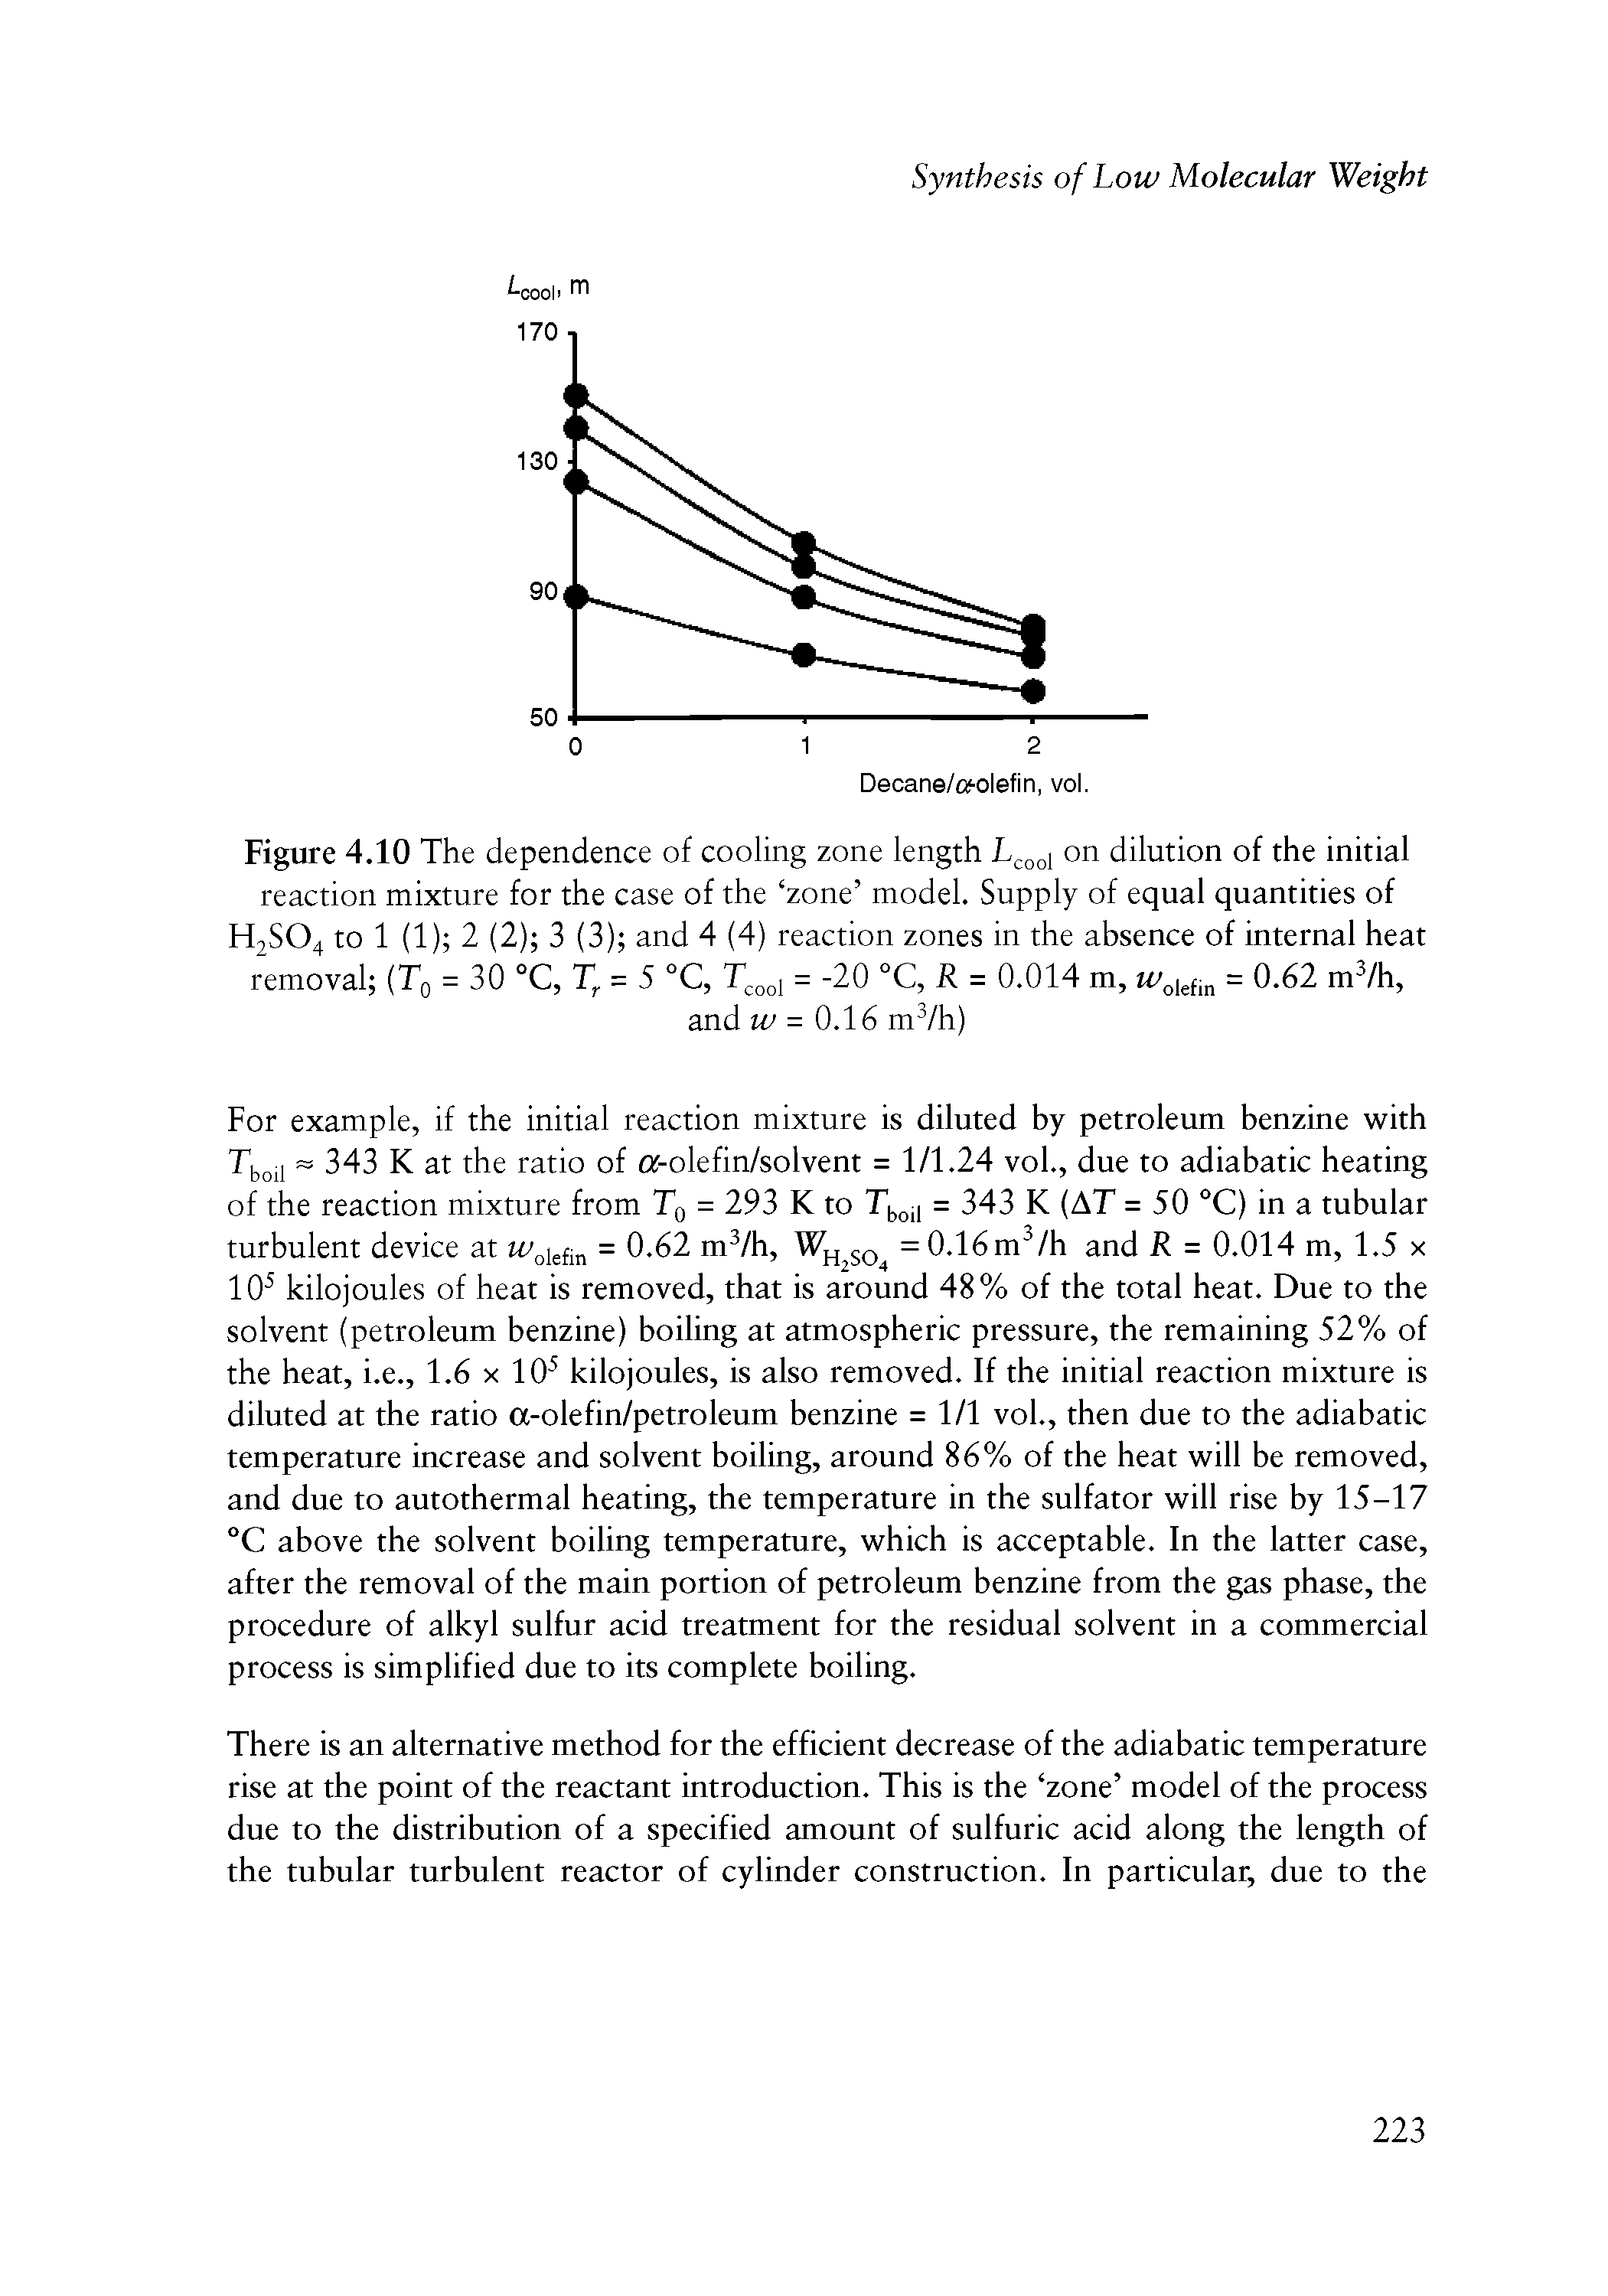 Figure 4.10 The dependence of cooling zone length on dilution of the initial reaction mixture for the case of the zone model. Supply of equal quantities of H2SO4 to 1 (1) 2 (2) 3 (3) and 4 (4) reaction zones in the absence of internal heat removal (Tg = 30 °C, T = 5 C, = -20 C, R = 0.014 m, = 0.62 m /h,...